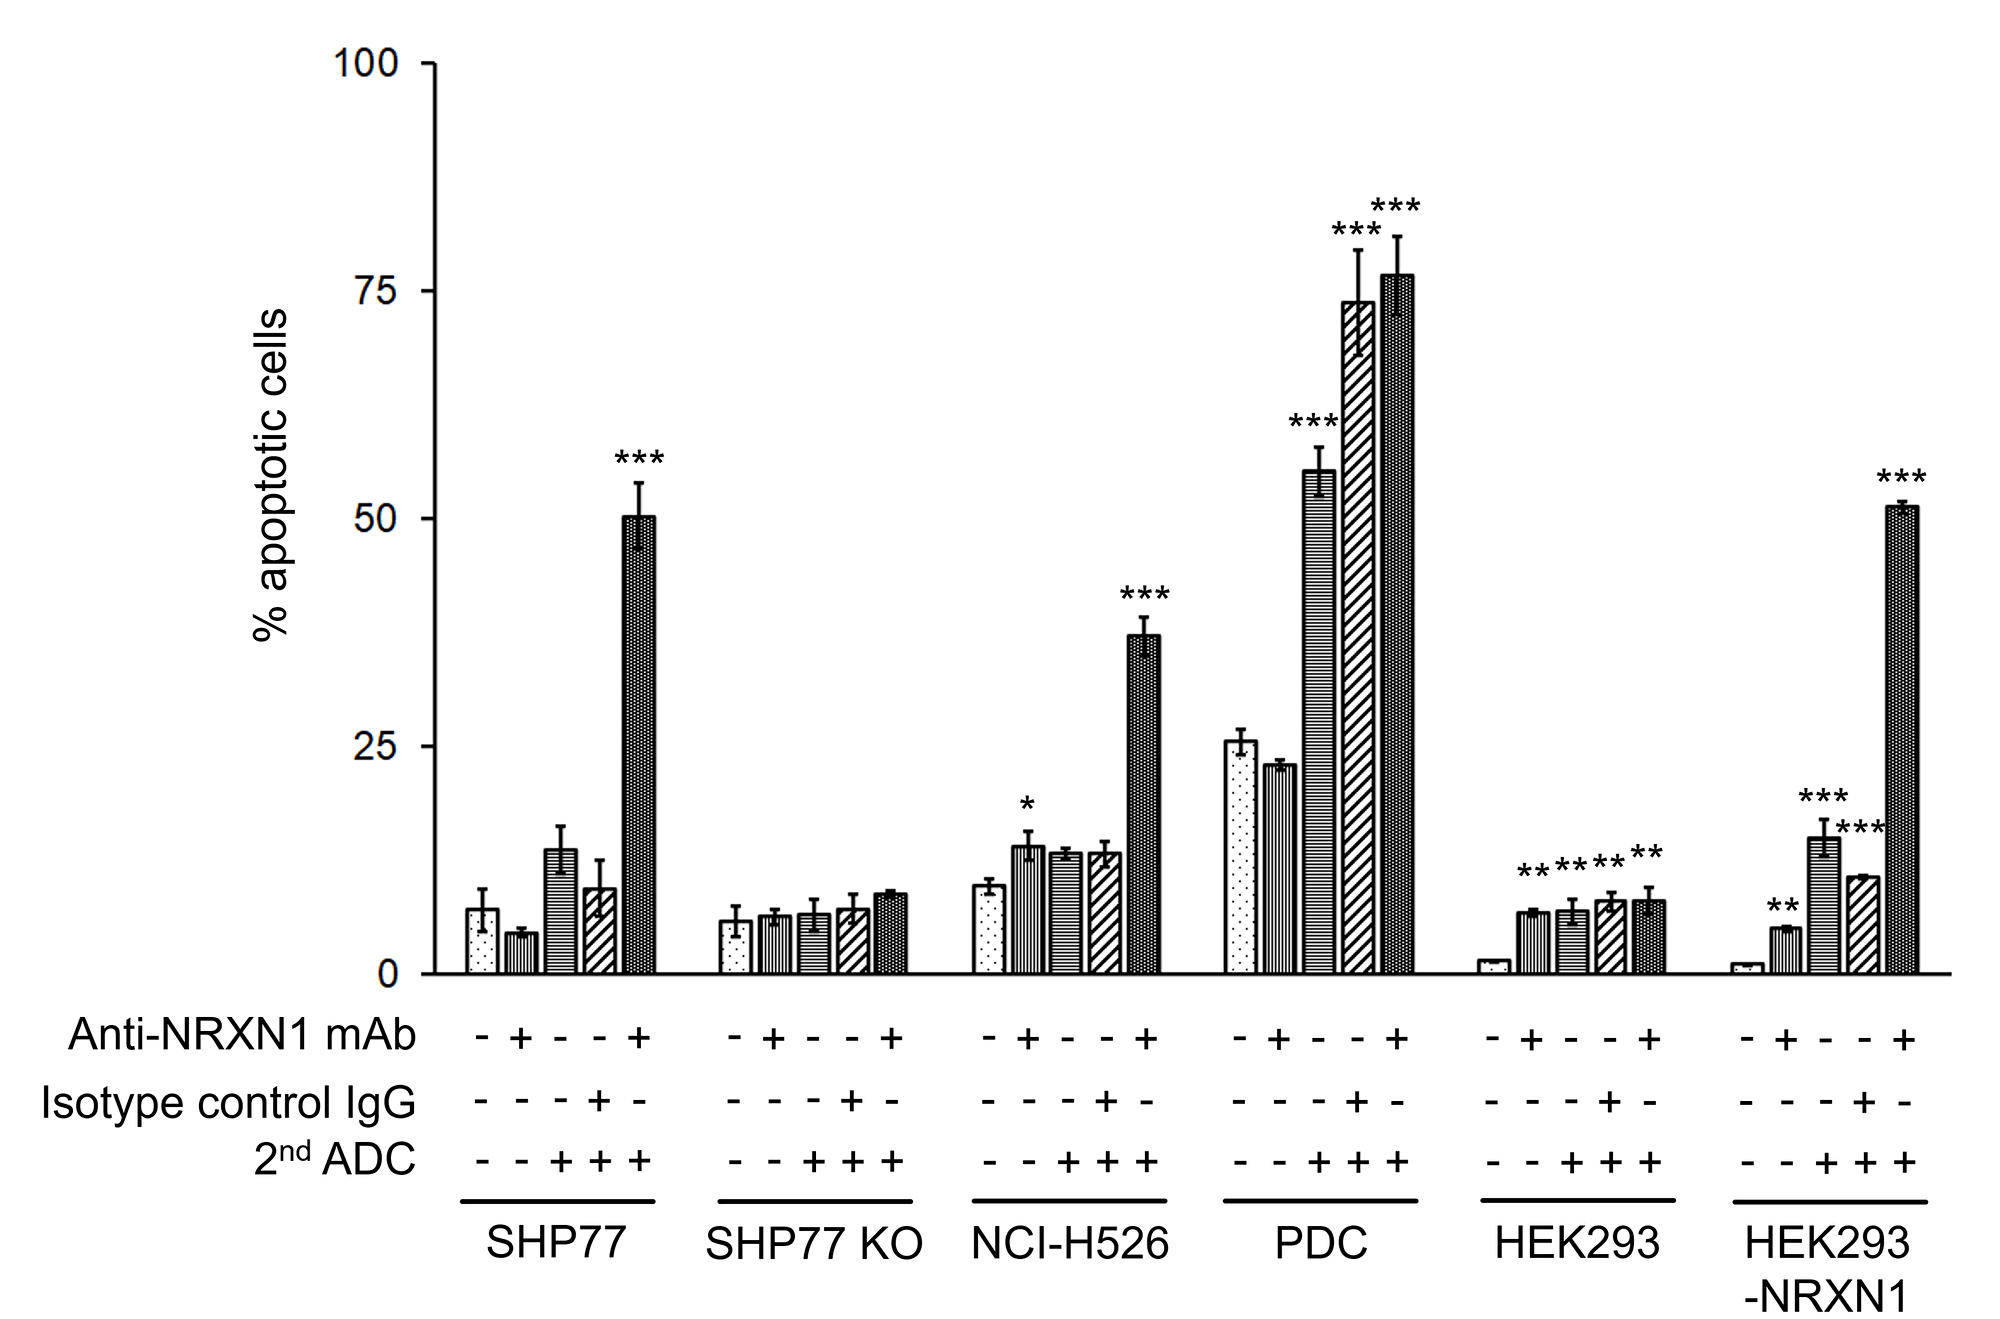 Apoptosis assay of NRXN1-targeted ADC at IC50 dose calculated by growth inhibition curves.